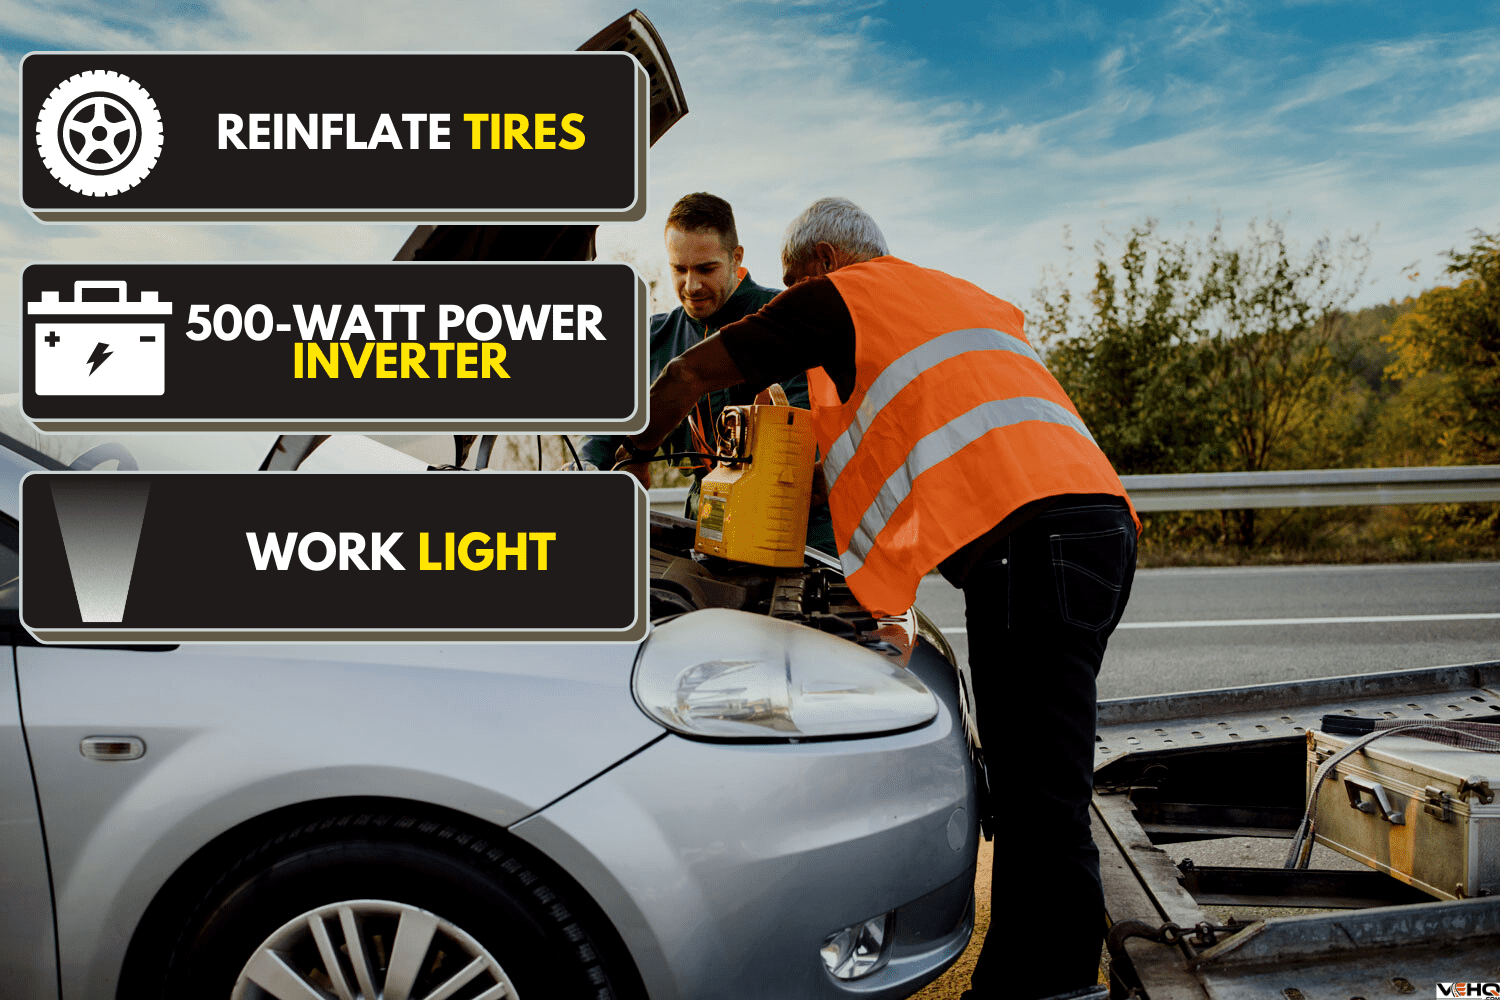 Two road assistant workers in towing service trying to start car engine with jump starter and energy station with air compressor. Roadside assistance concept., How To Use A DeWalt Jump Starter [Step-By-Step Guide]